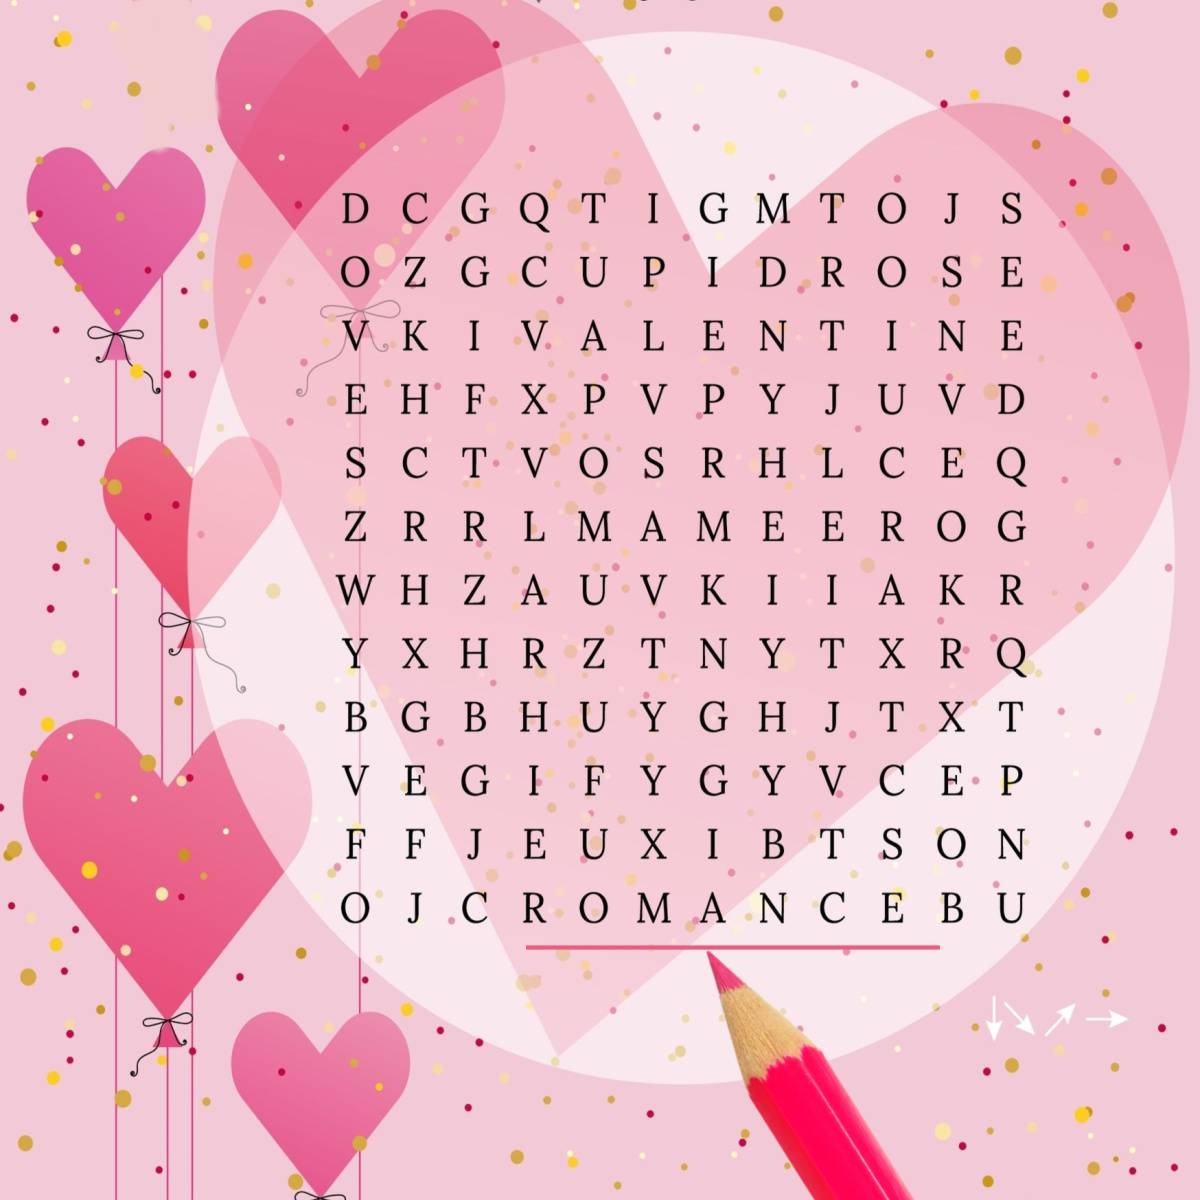 February Word Search Printable National Days Word Find Puzzle